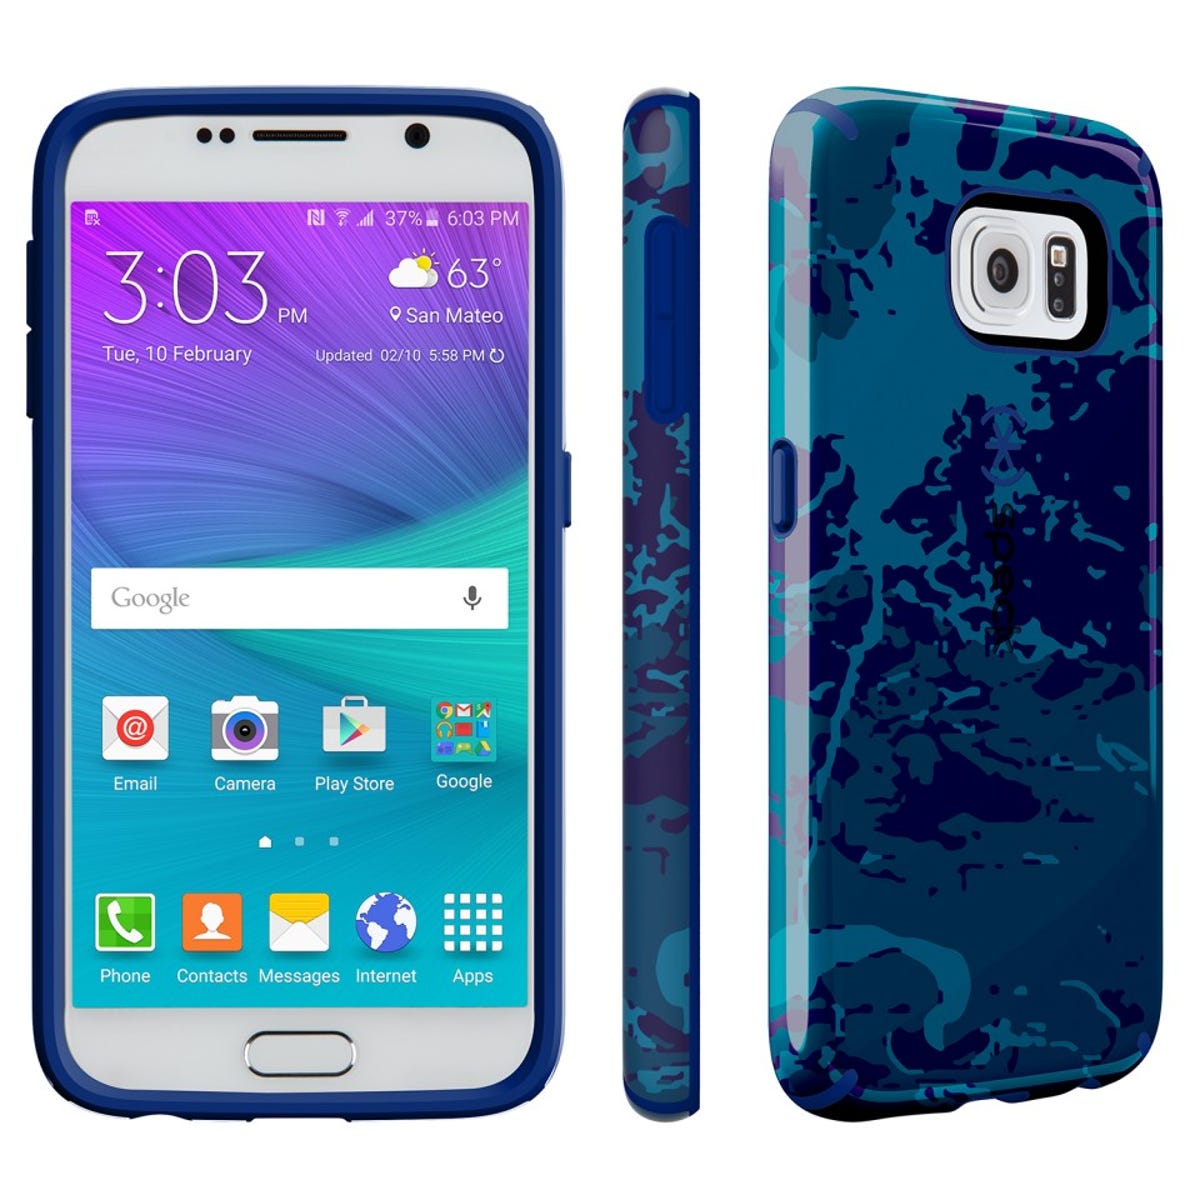 Best Samsung Galaxy S6 and S6 Edge - CNET